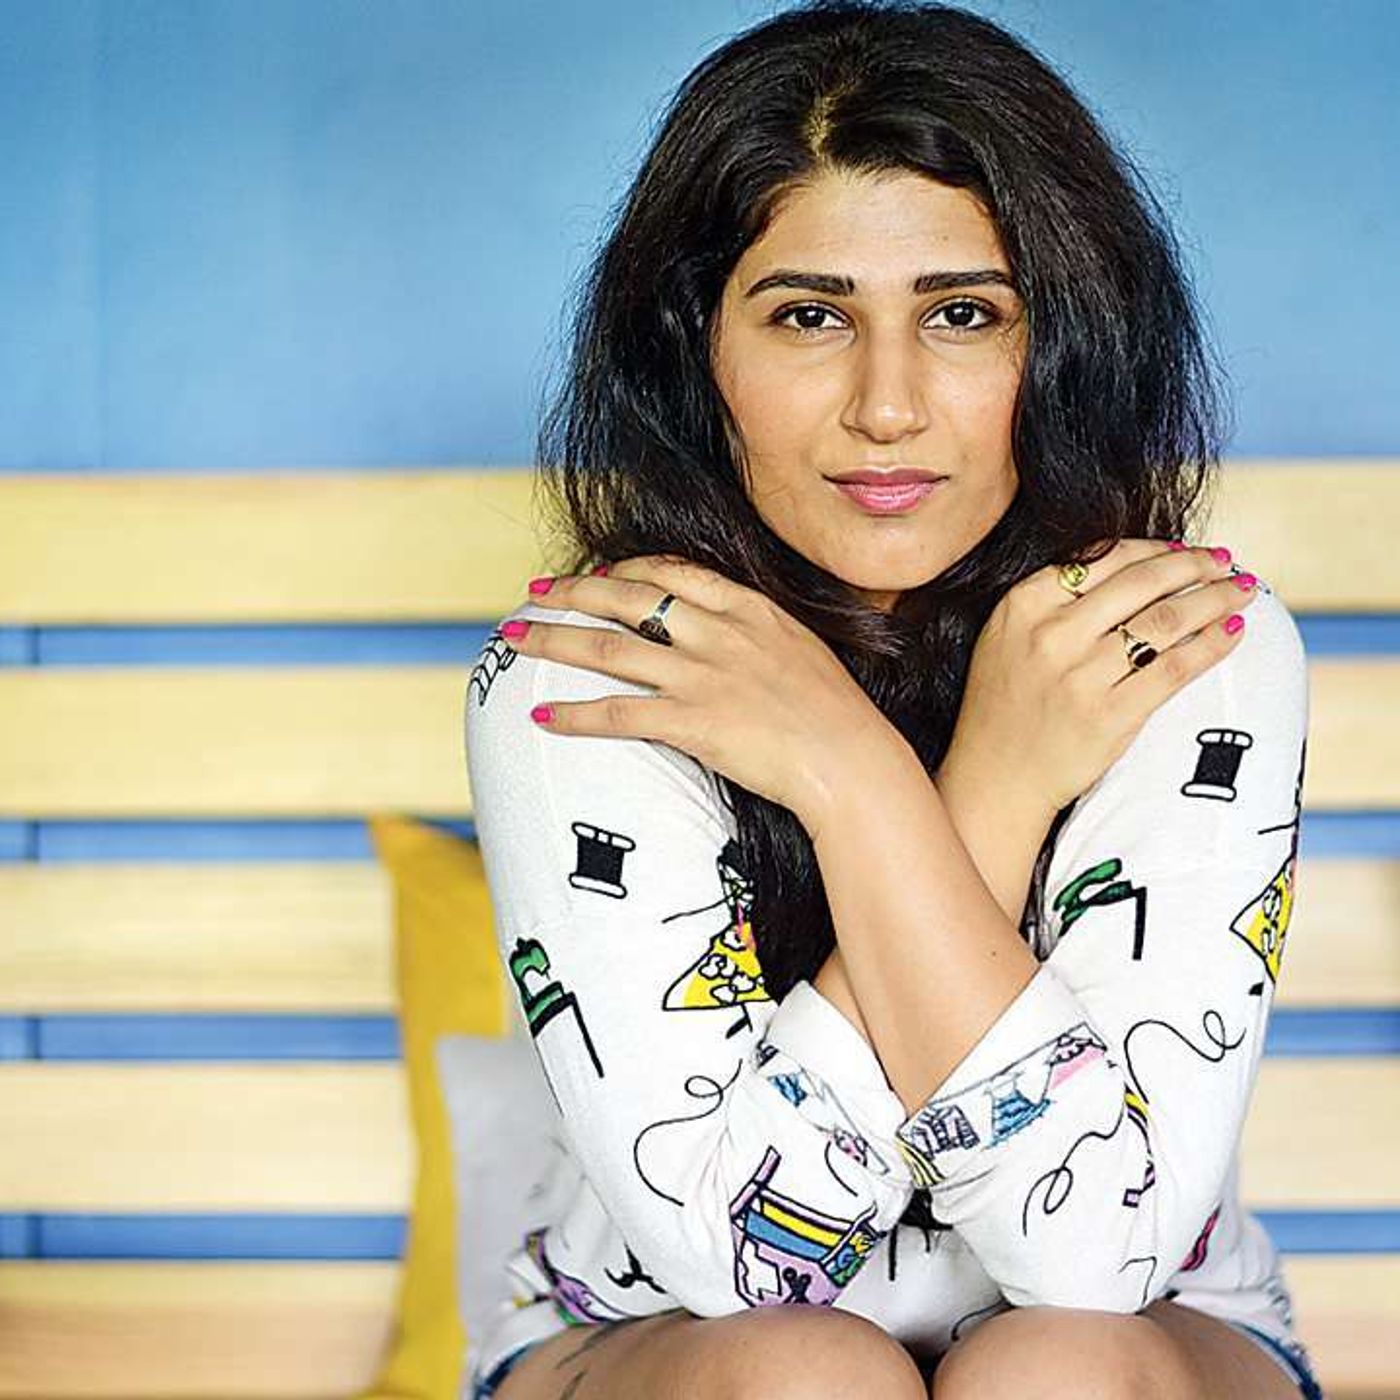 Supplemental Episode 16: Our Chat with Shashaa Tirupati